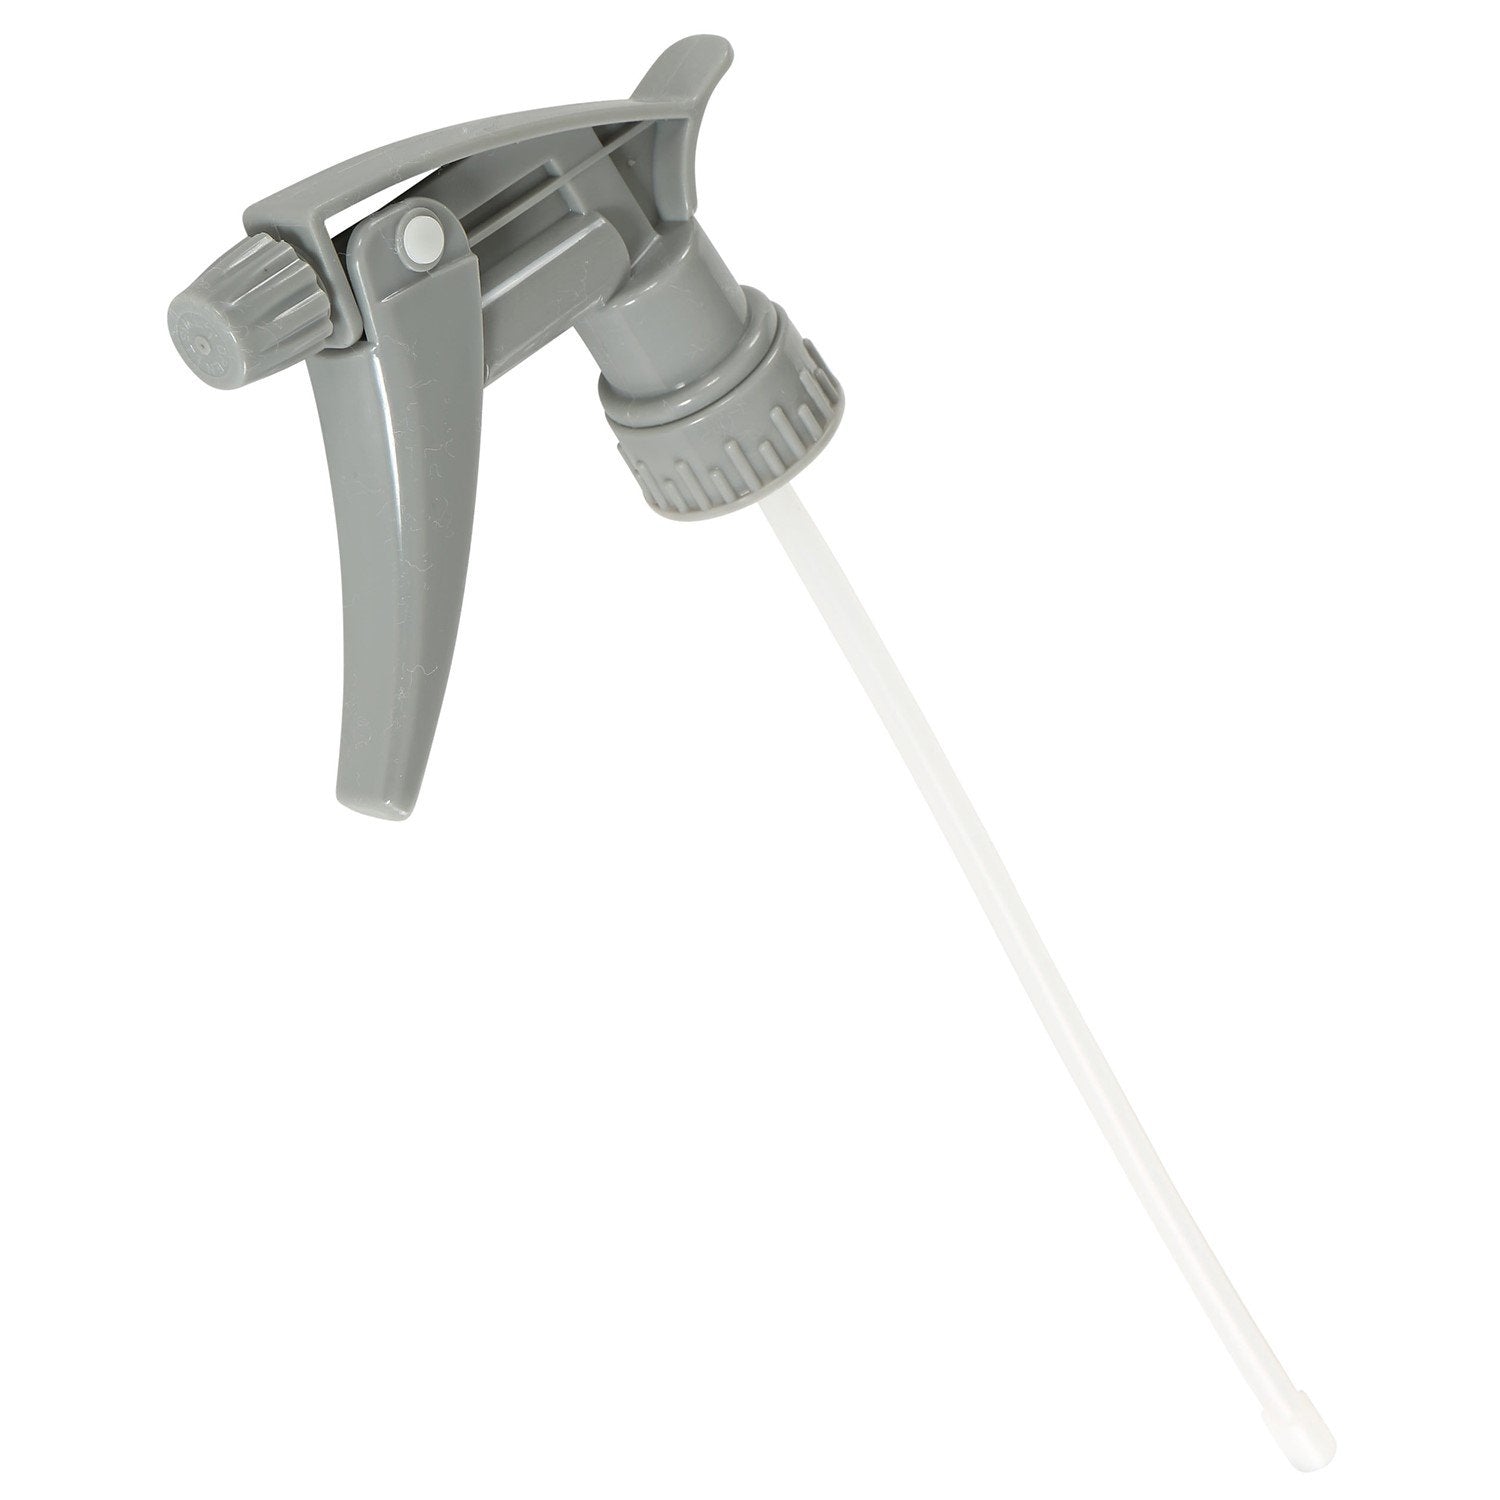 RBL Products 12061 RBL Products Acid/Solvent-Resistant Sprayer Triggers